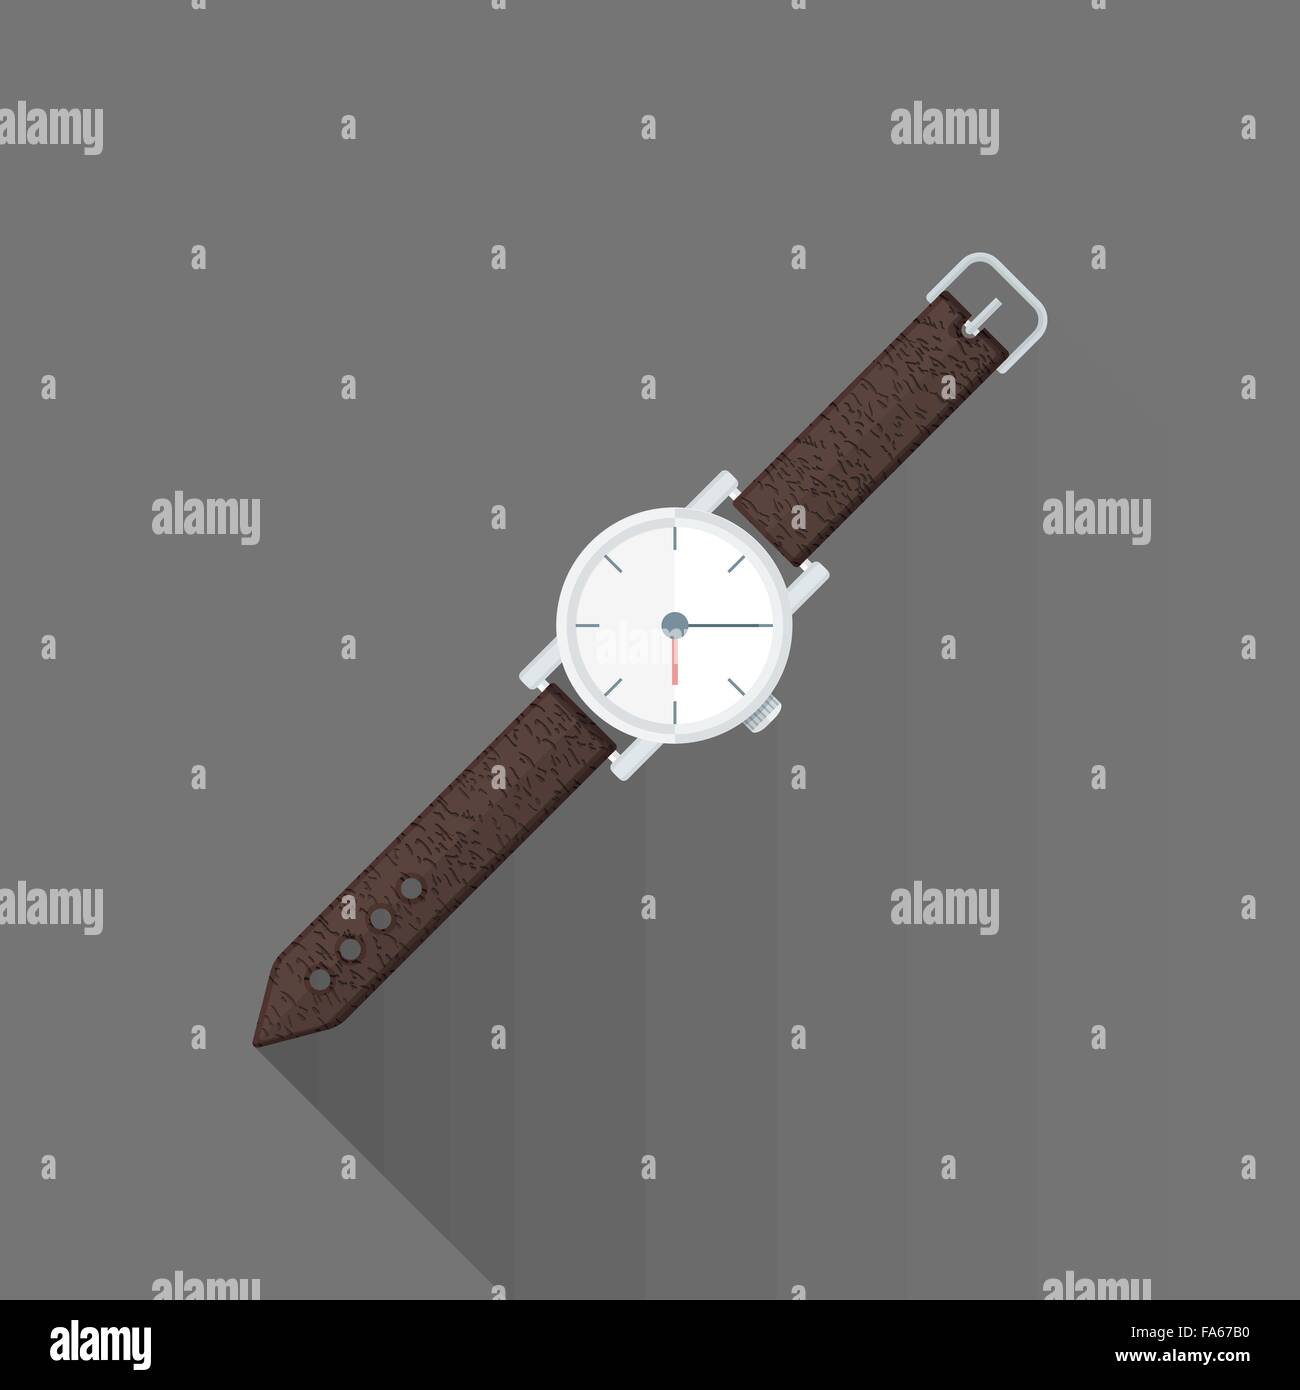 vector colored flat design metal wristwatch brown leather strap isolated illustration gray background long shadow Stock Vector